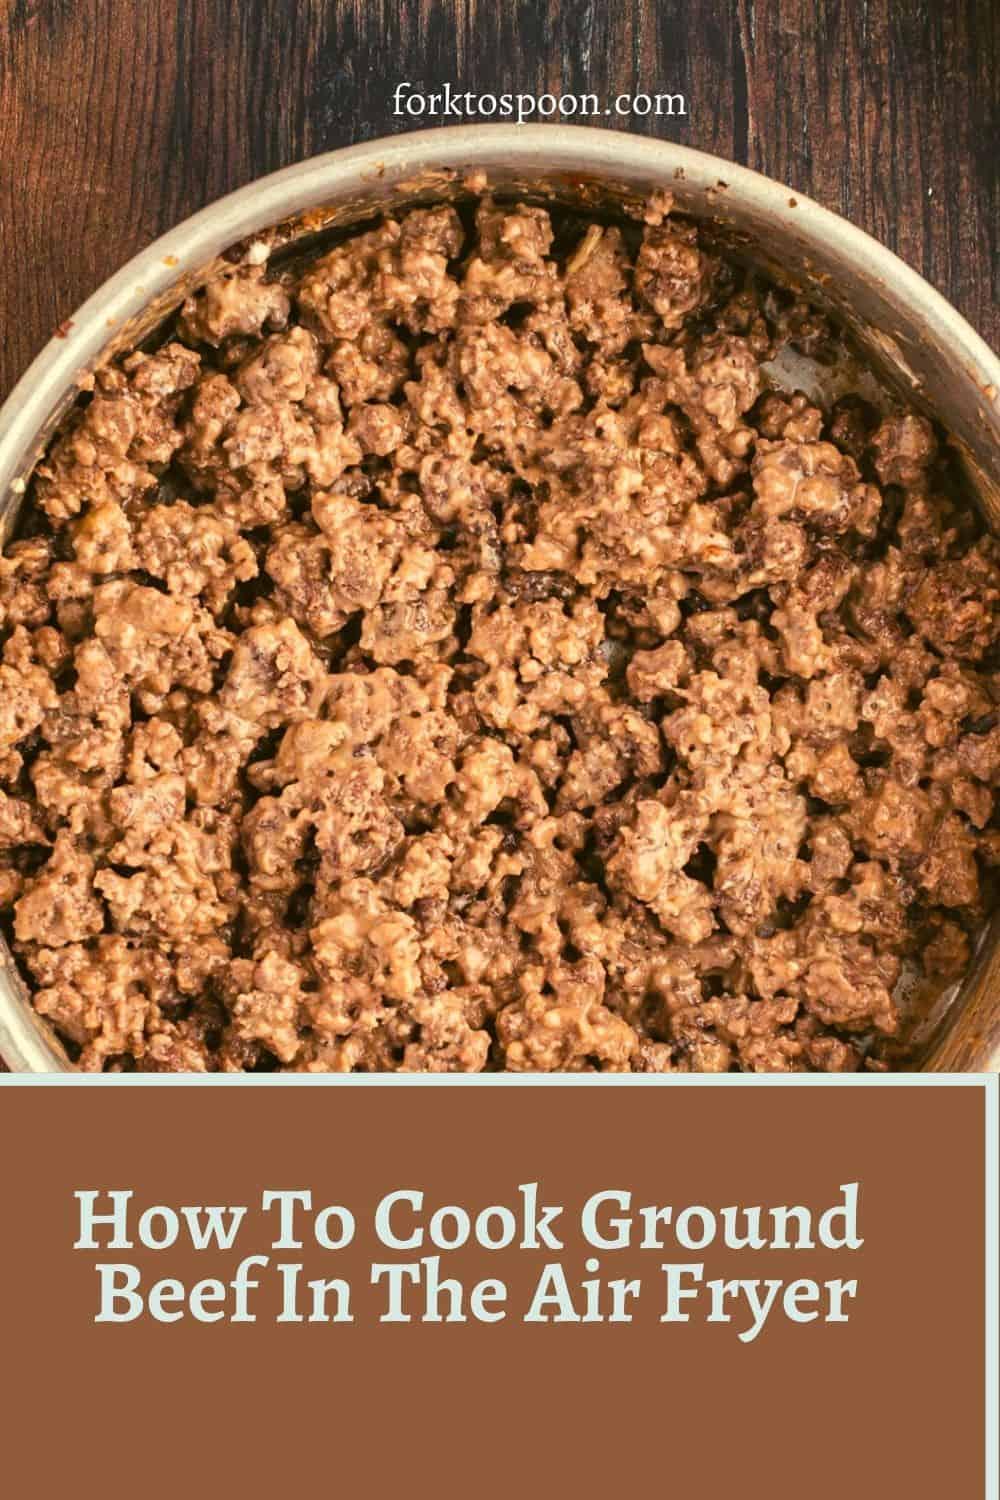 How To Cook Ground Beef In The Air Fryer